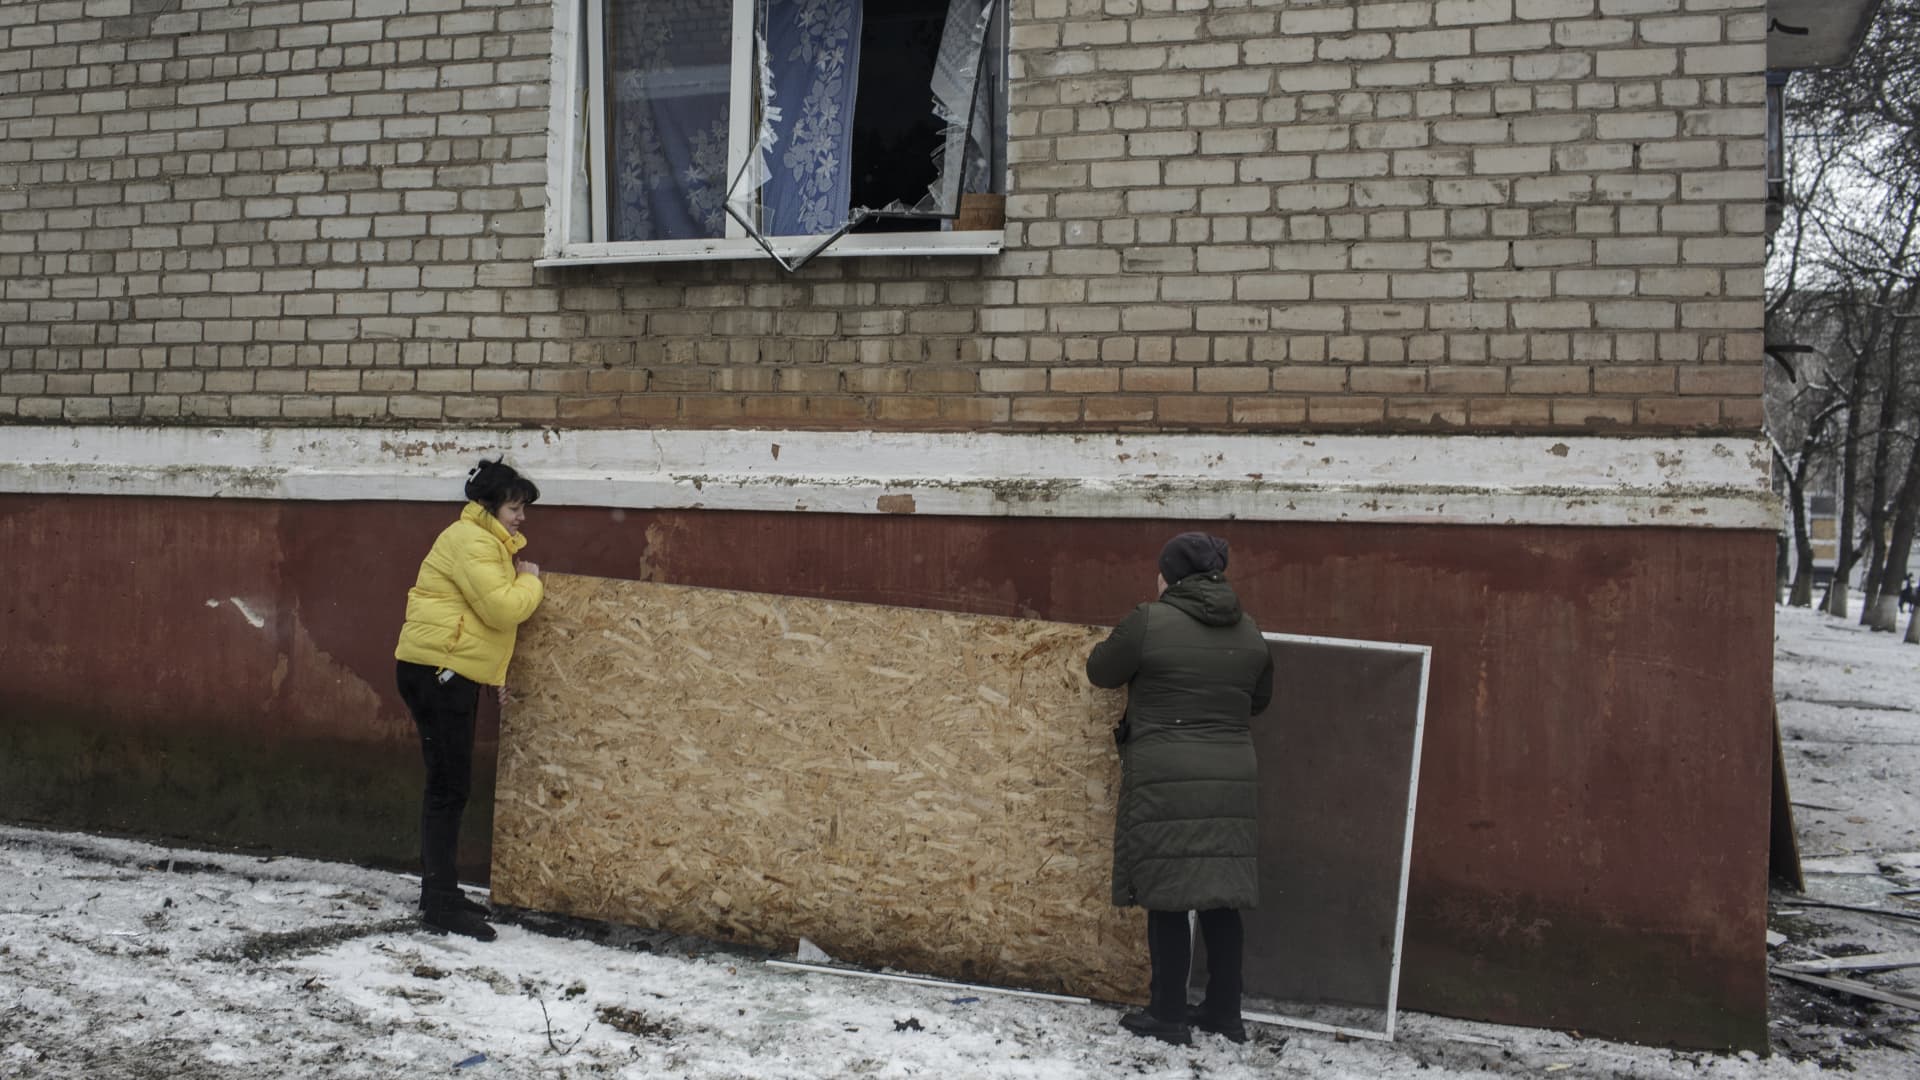 Citizens use piece of wood to repair damaged window after a Russian missile strike in Kramatorsk, Donetsk Oblast, Ukraine on February 02, 2023.